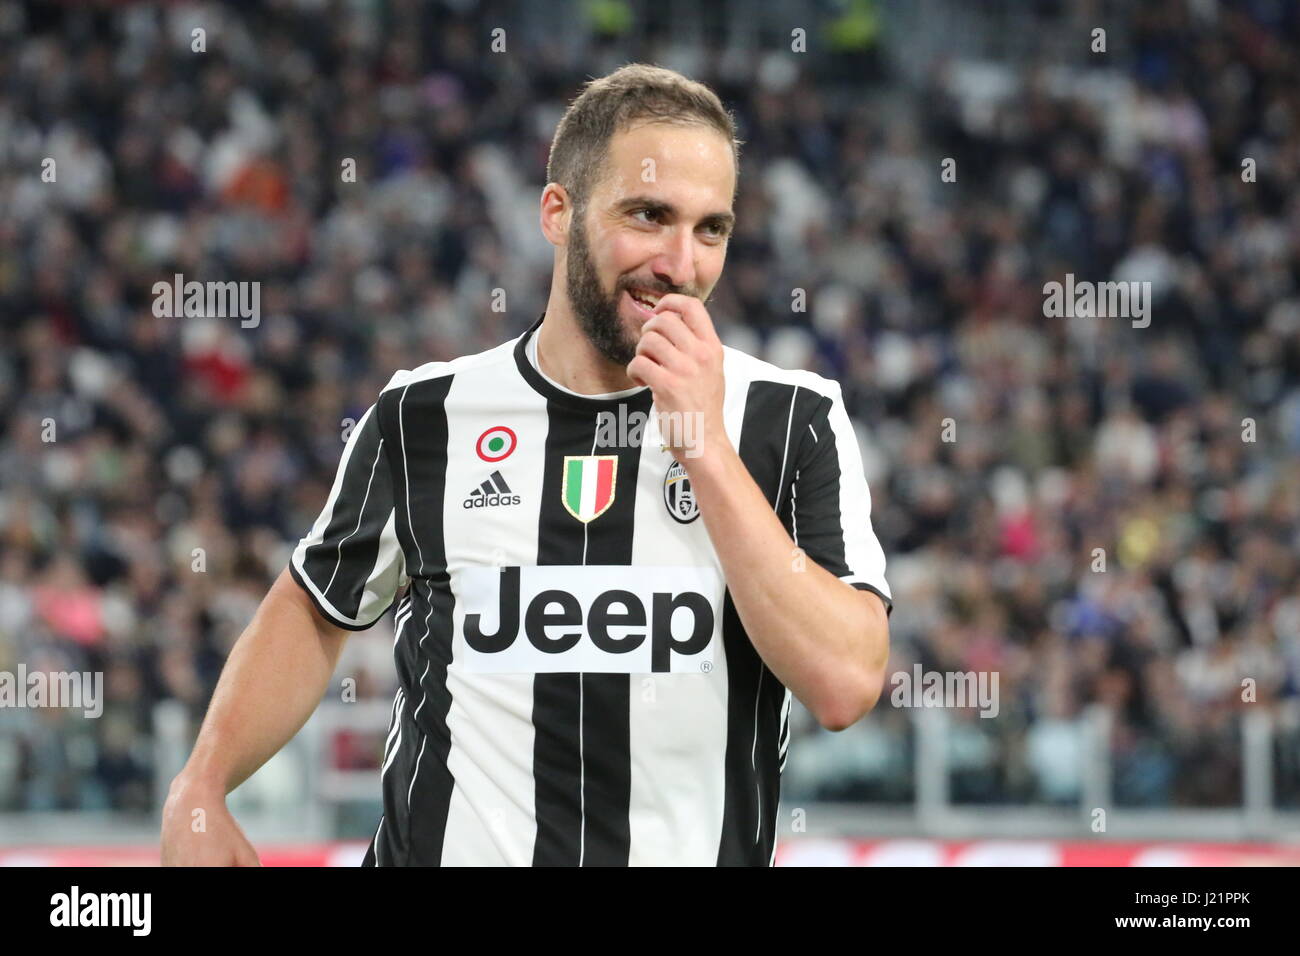 Turin, Italy. 23rd Apr, 2017. Gonzalo Higuain (Juventus FC) during the Serie A football match between Juventus FC and Genoa FC at Juventus Stadium on April 23, 2017 in Turin, Italy. Credit: Massimiliano Ferraro/Alamy Live News Stock Photo